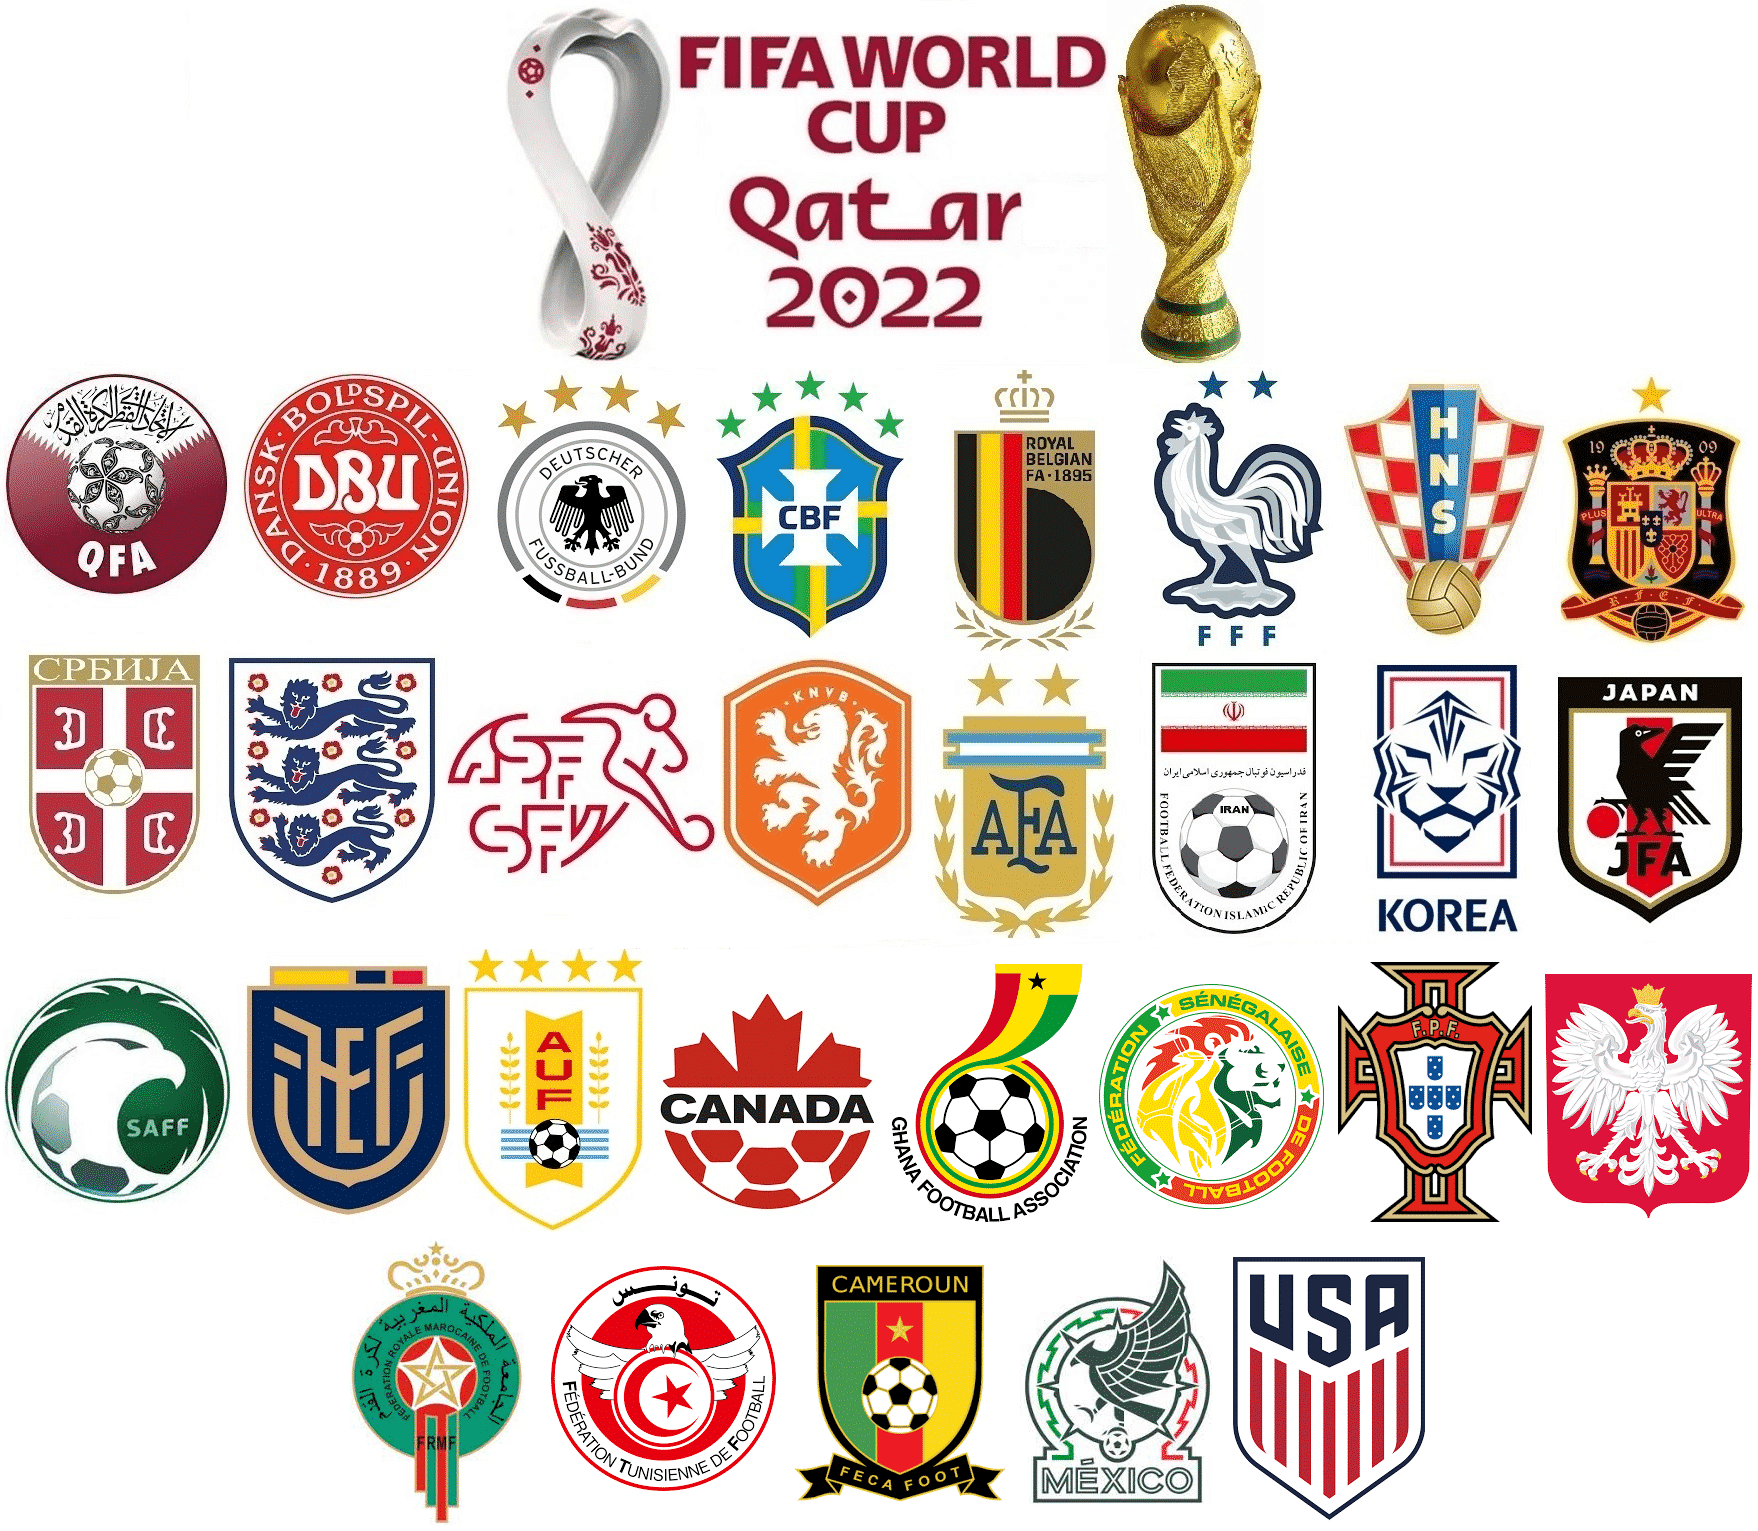 FIFA World Cup 2022 Qualifiers